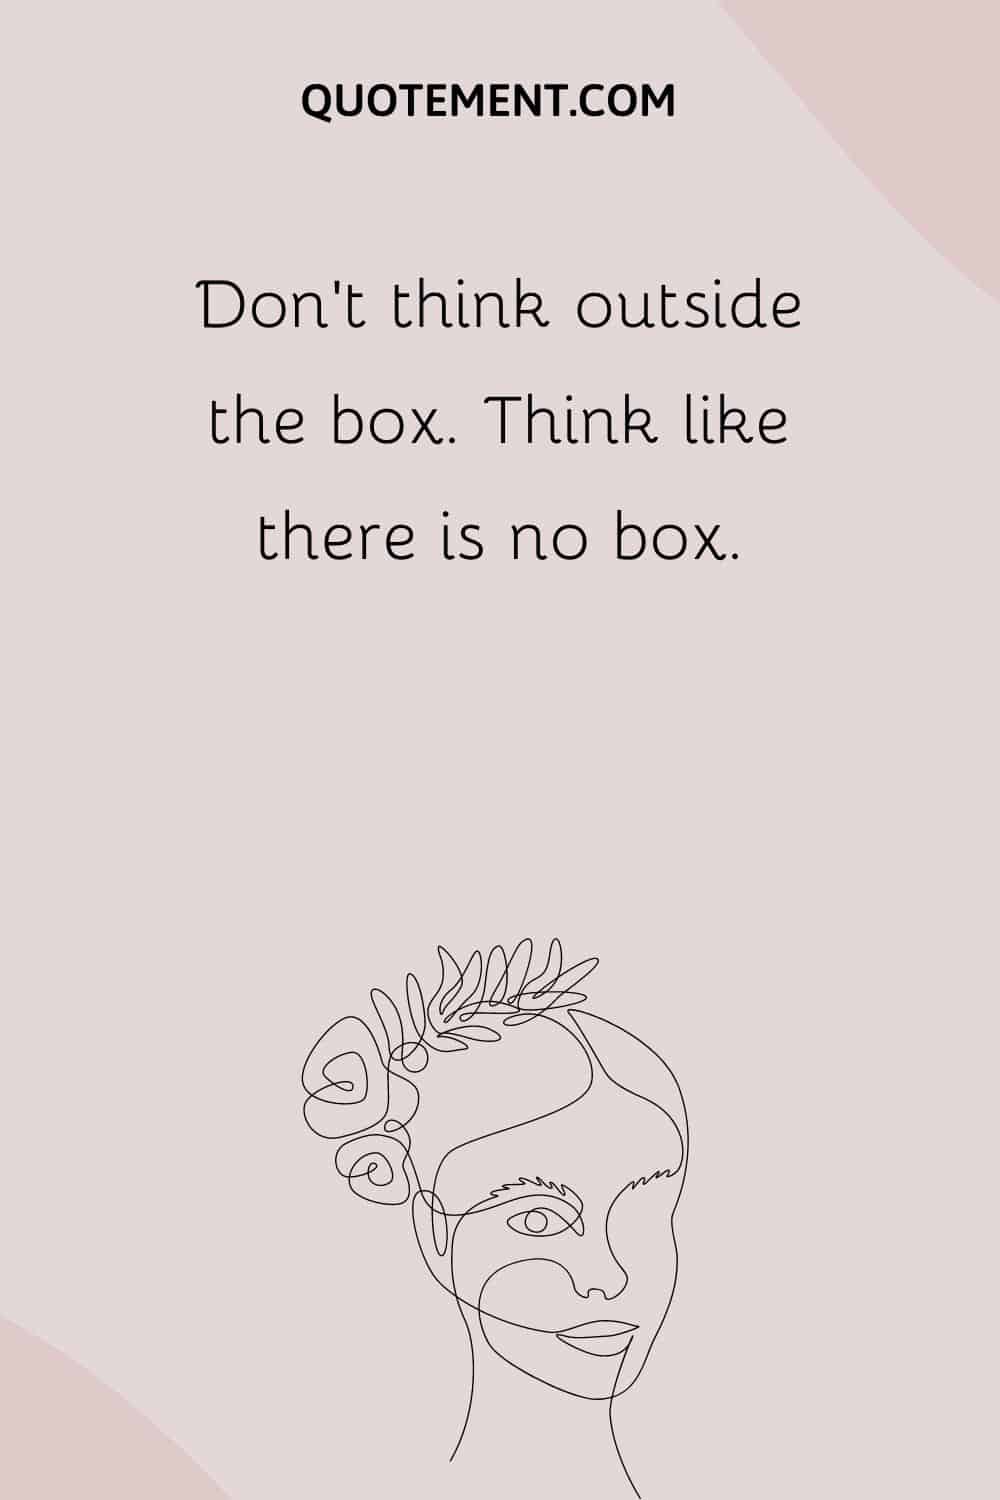 Don’t think outside the box. Think like there is no box.